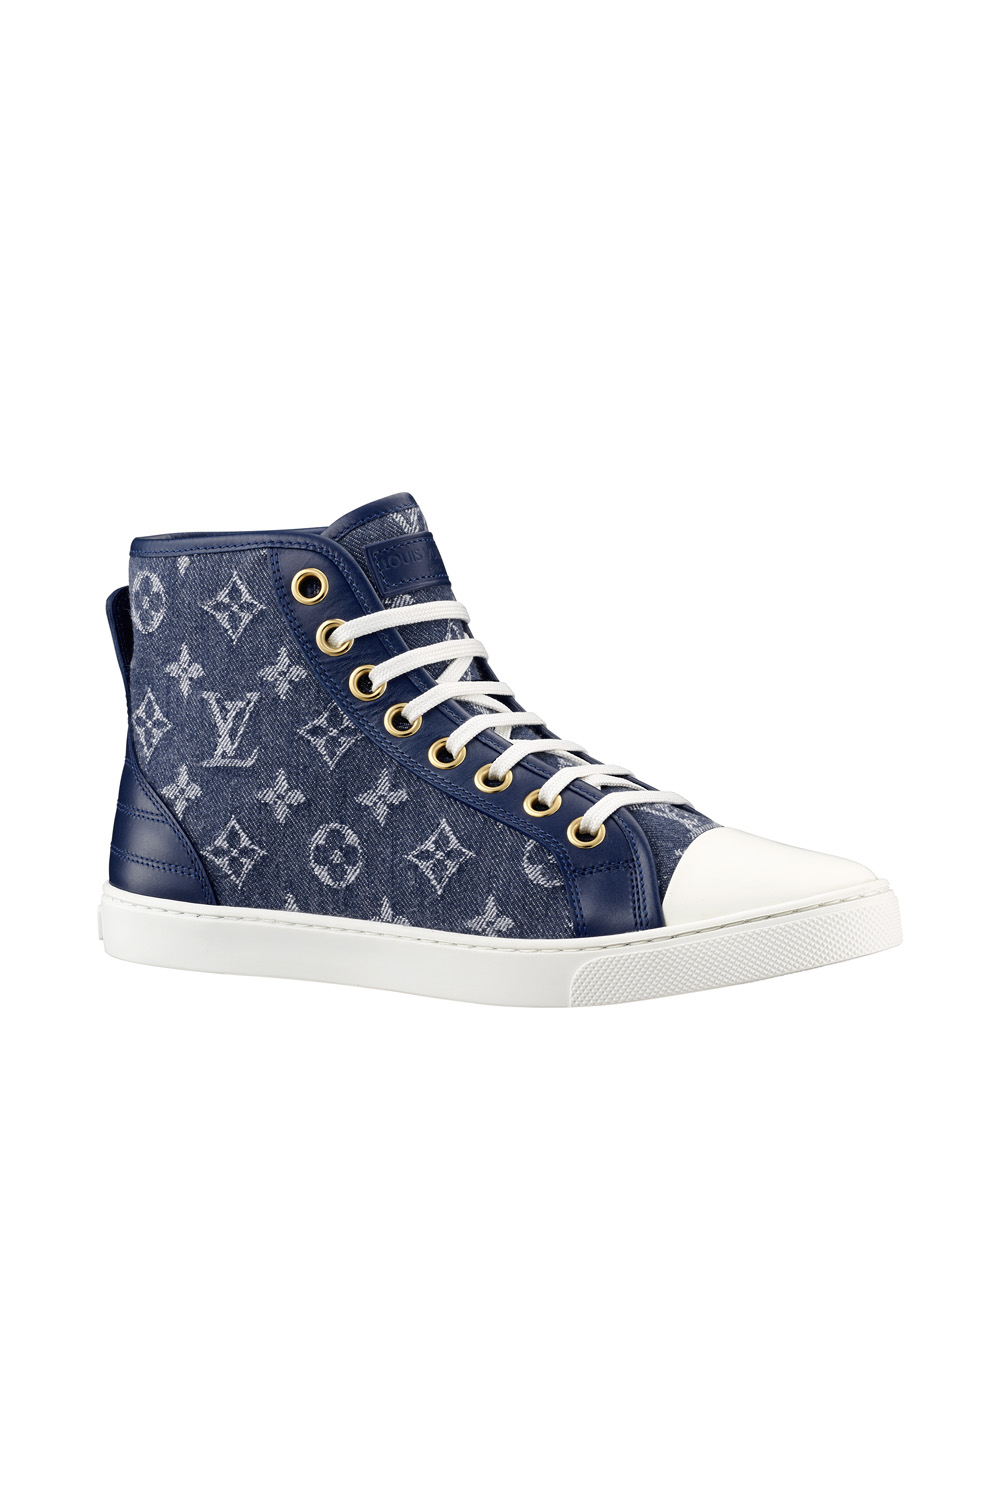 Trainers, $1,110, by Louis Vuitton.